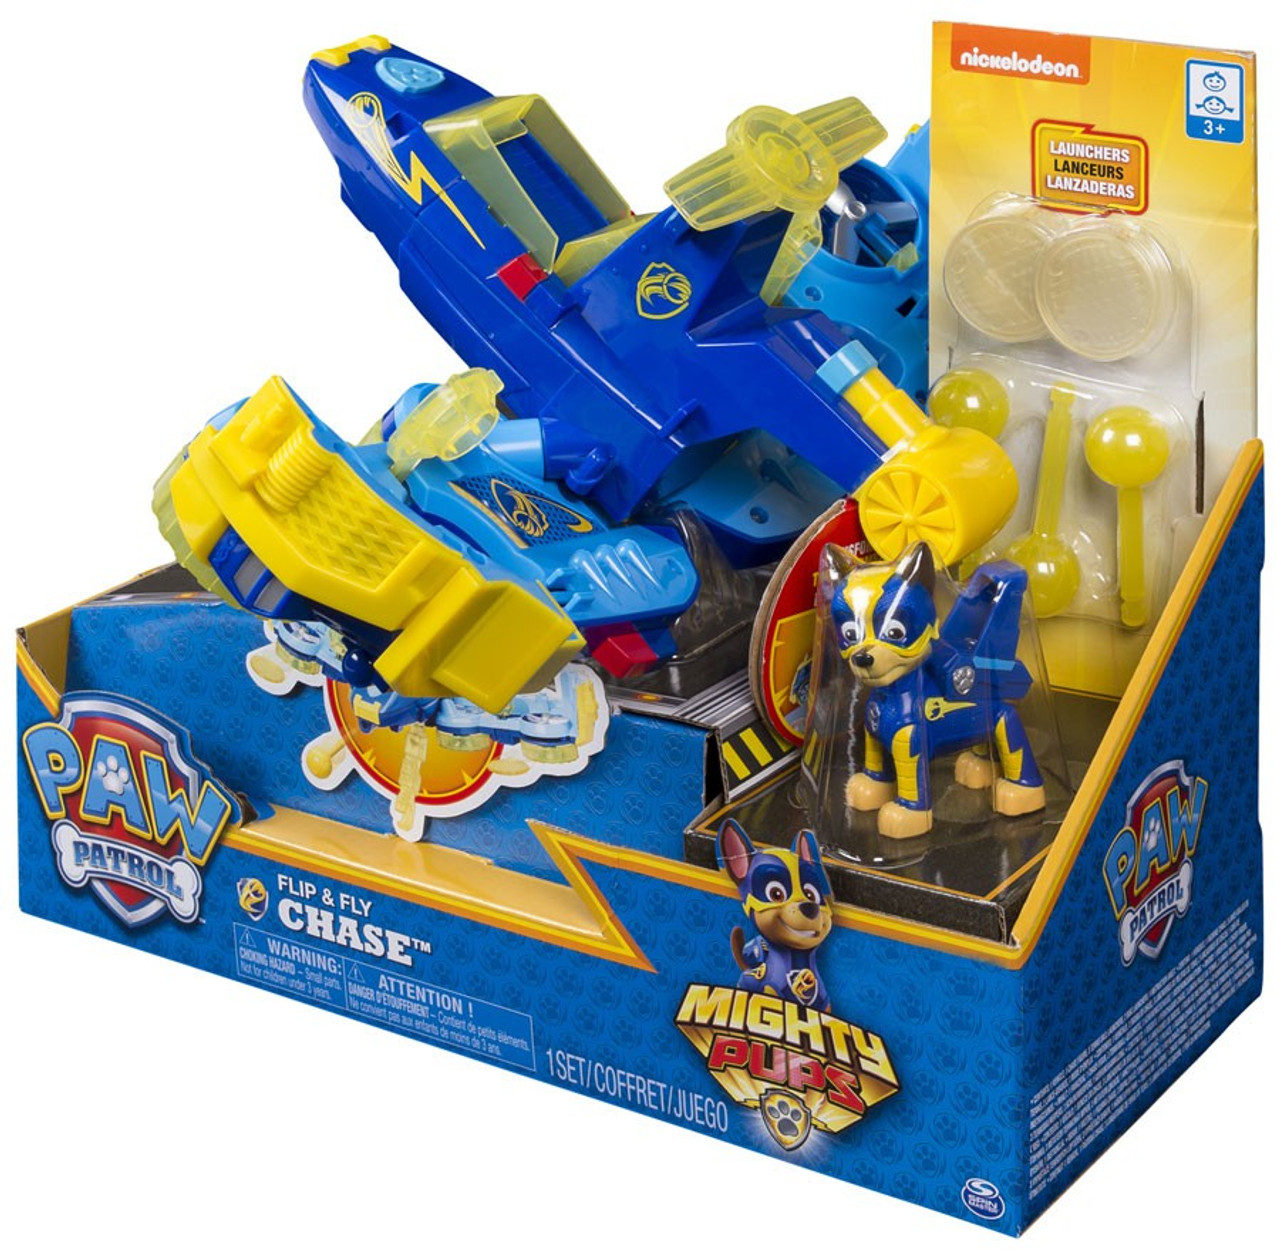 Paw Patrol Pups Fly Chase Exclusive Transforming Vehicle Spin Master - ToyWiz